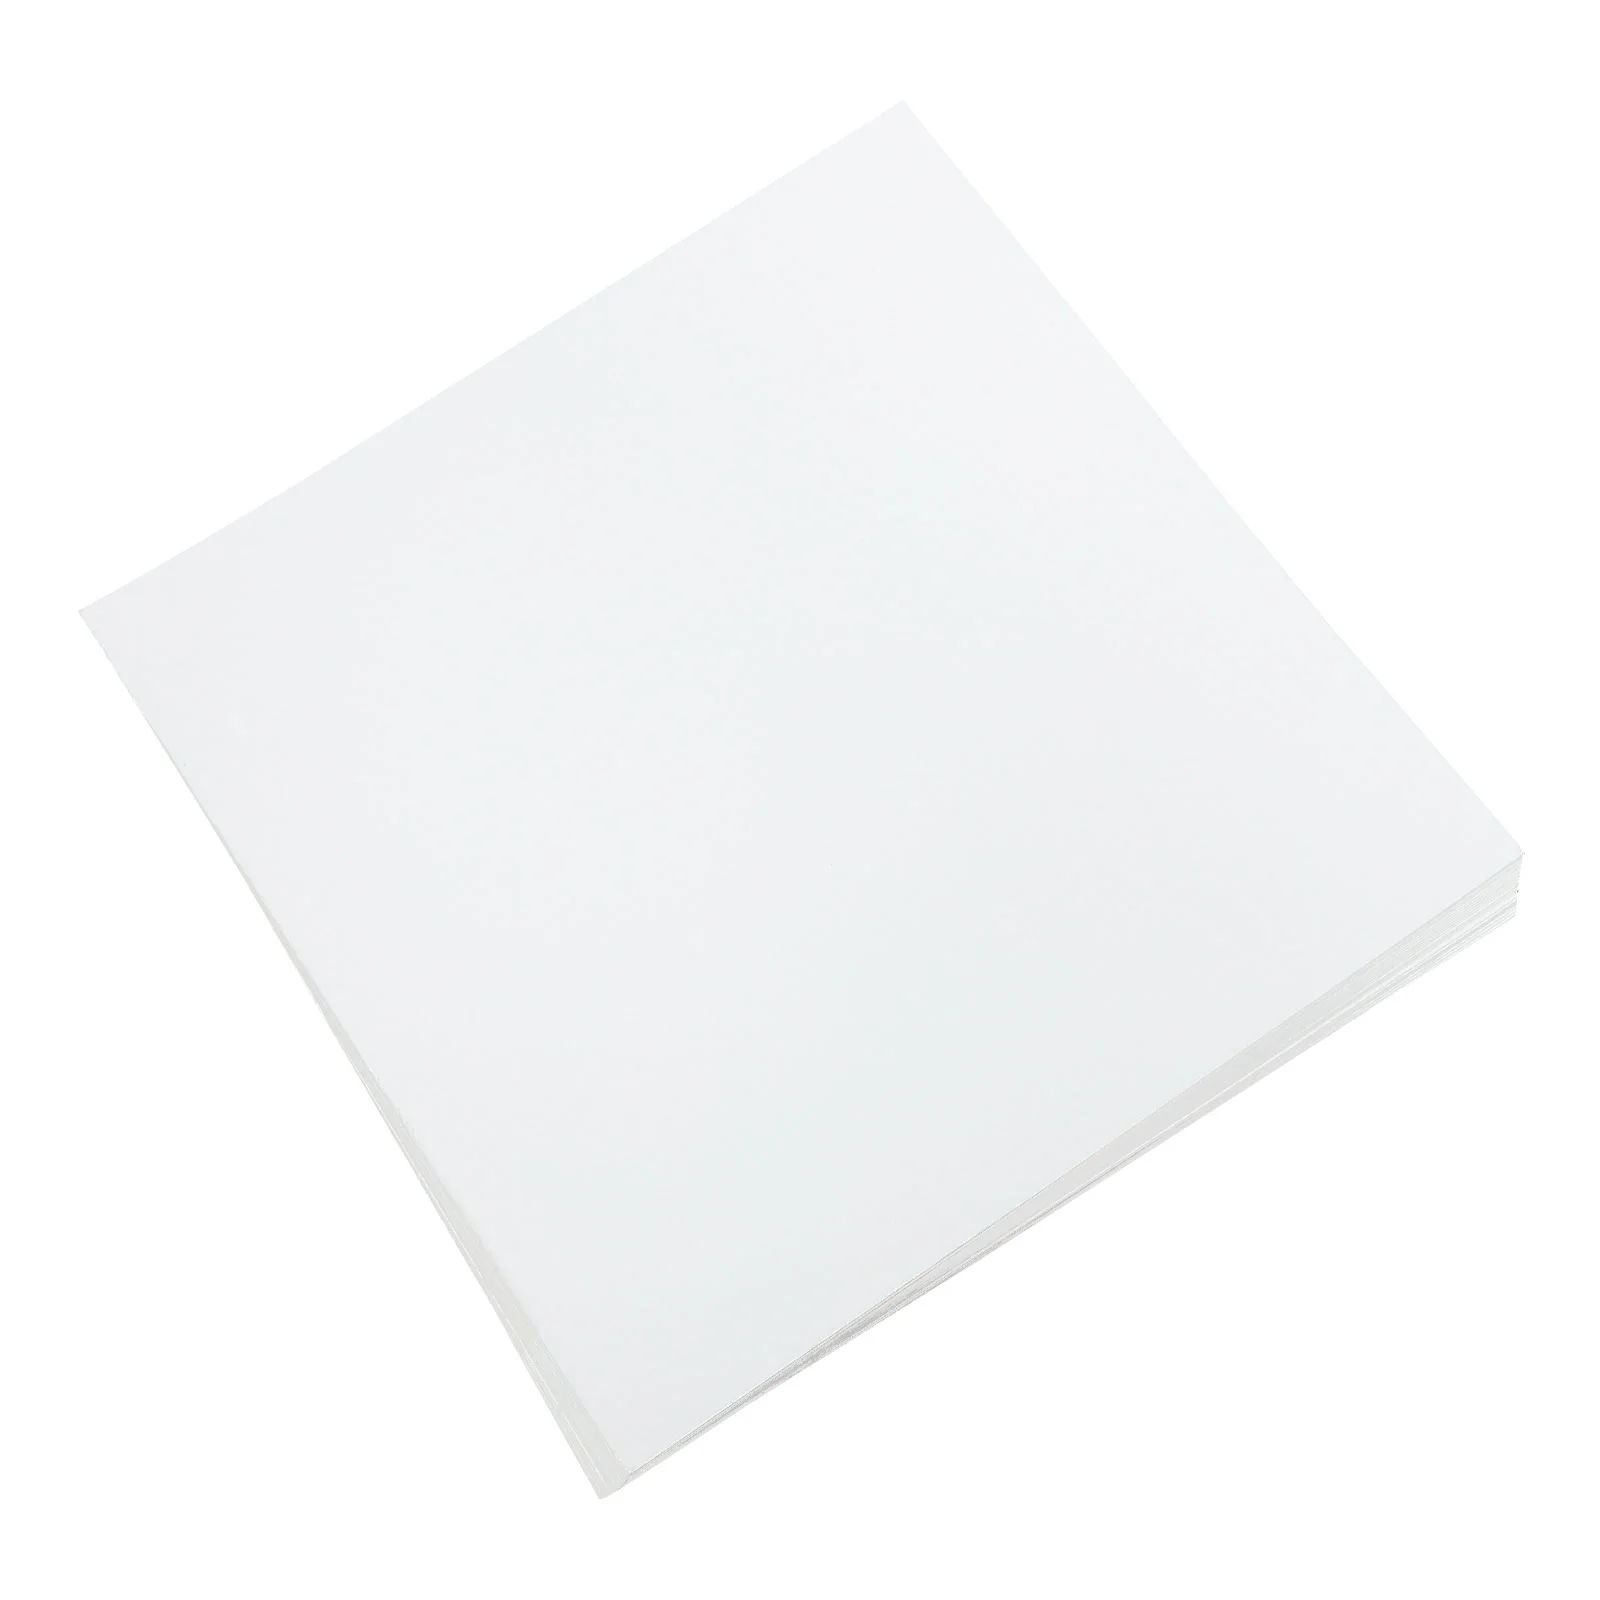 

30 Sheets Laboratory Filter Paper Labs Papers for Absorbing Qualitative Stickers Experiment Filtering High